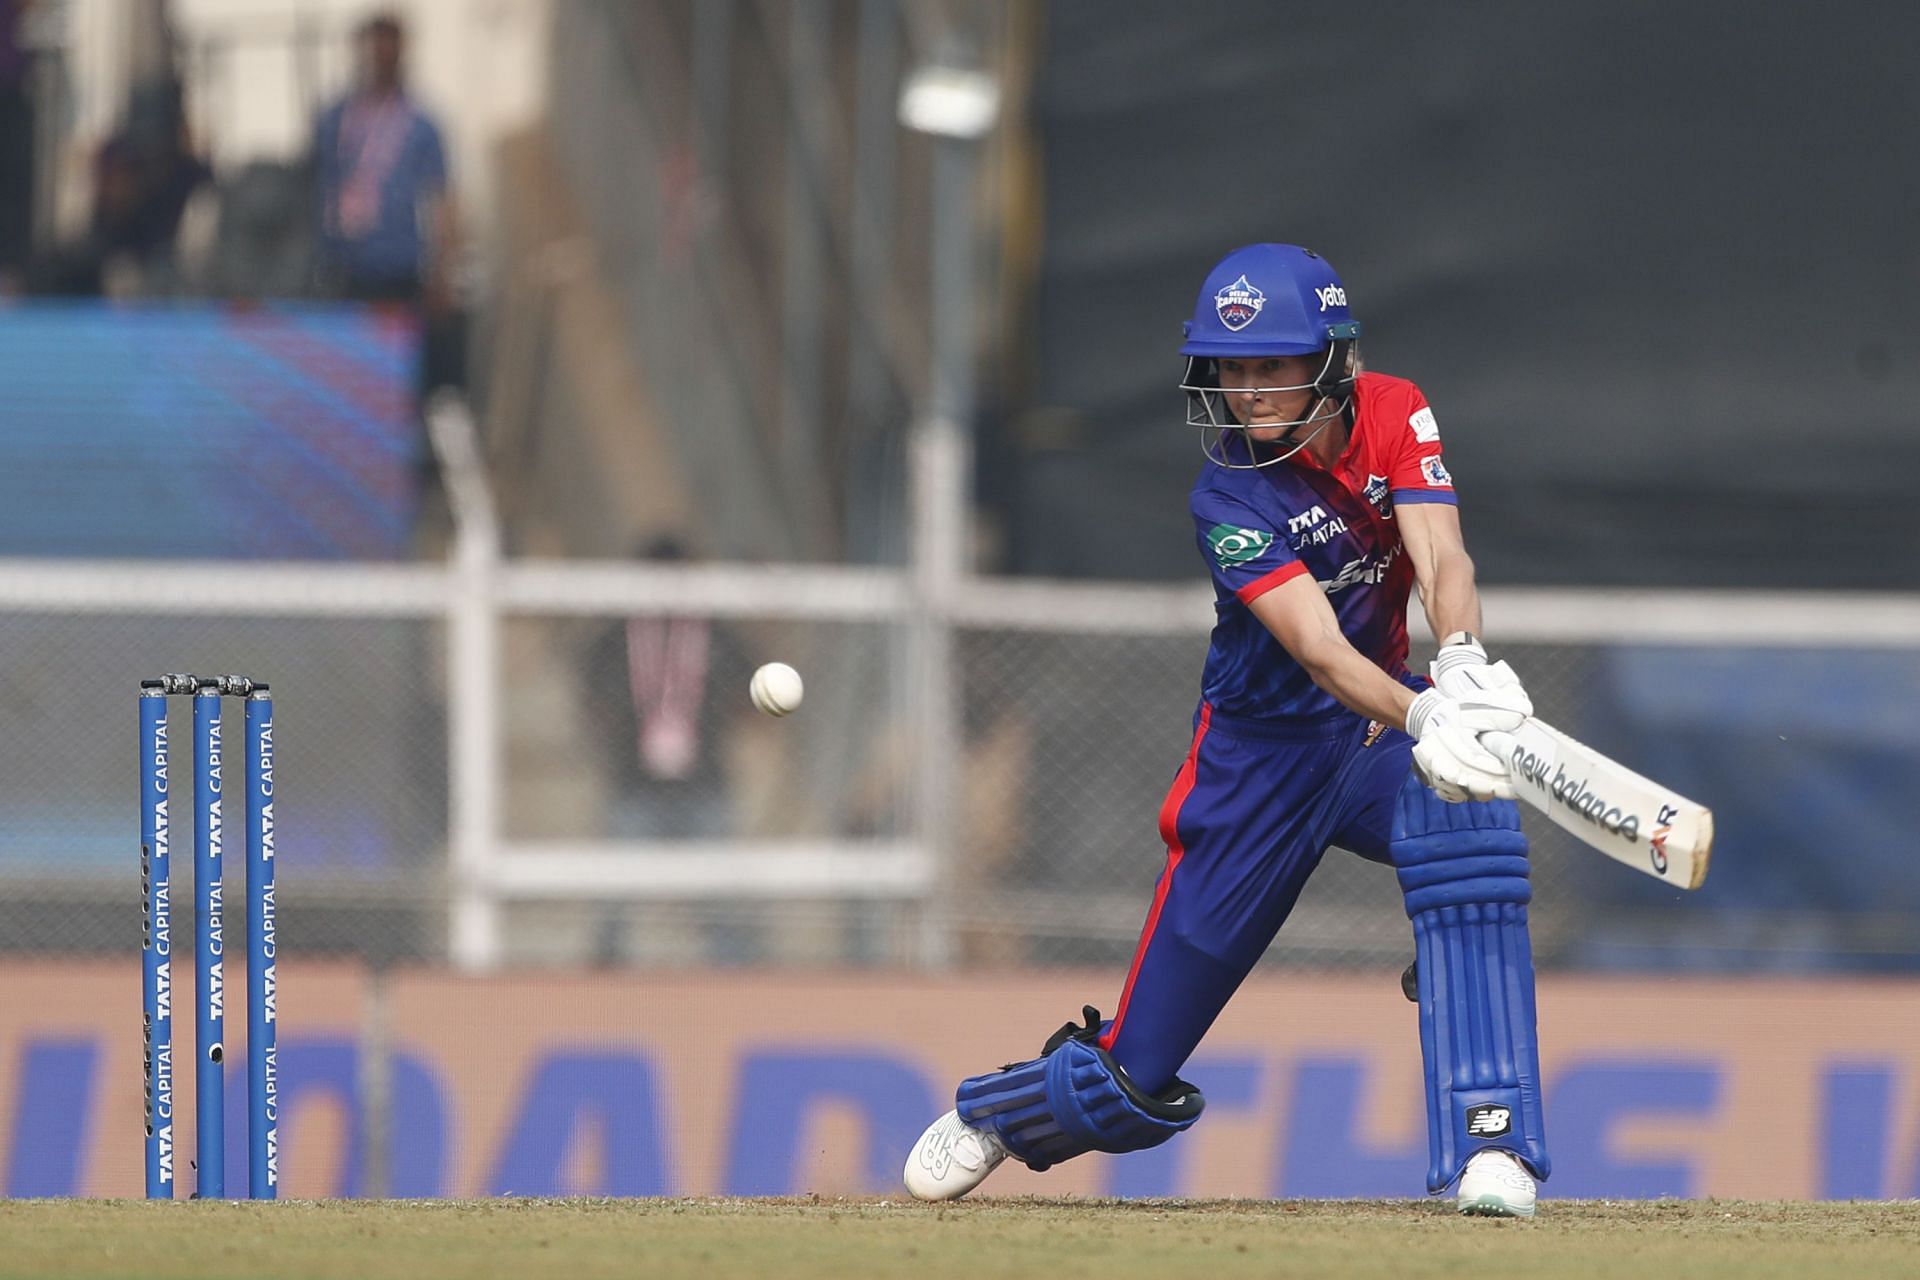 Meg Lanning struck 10 fours and three sixes during her innings.